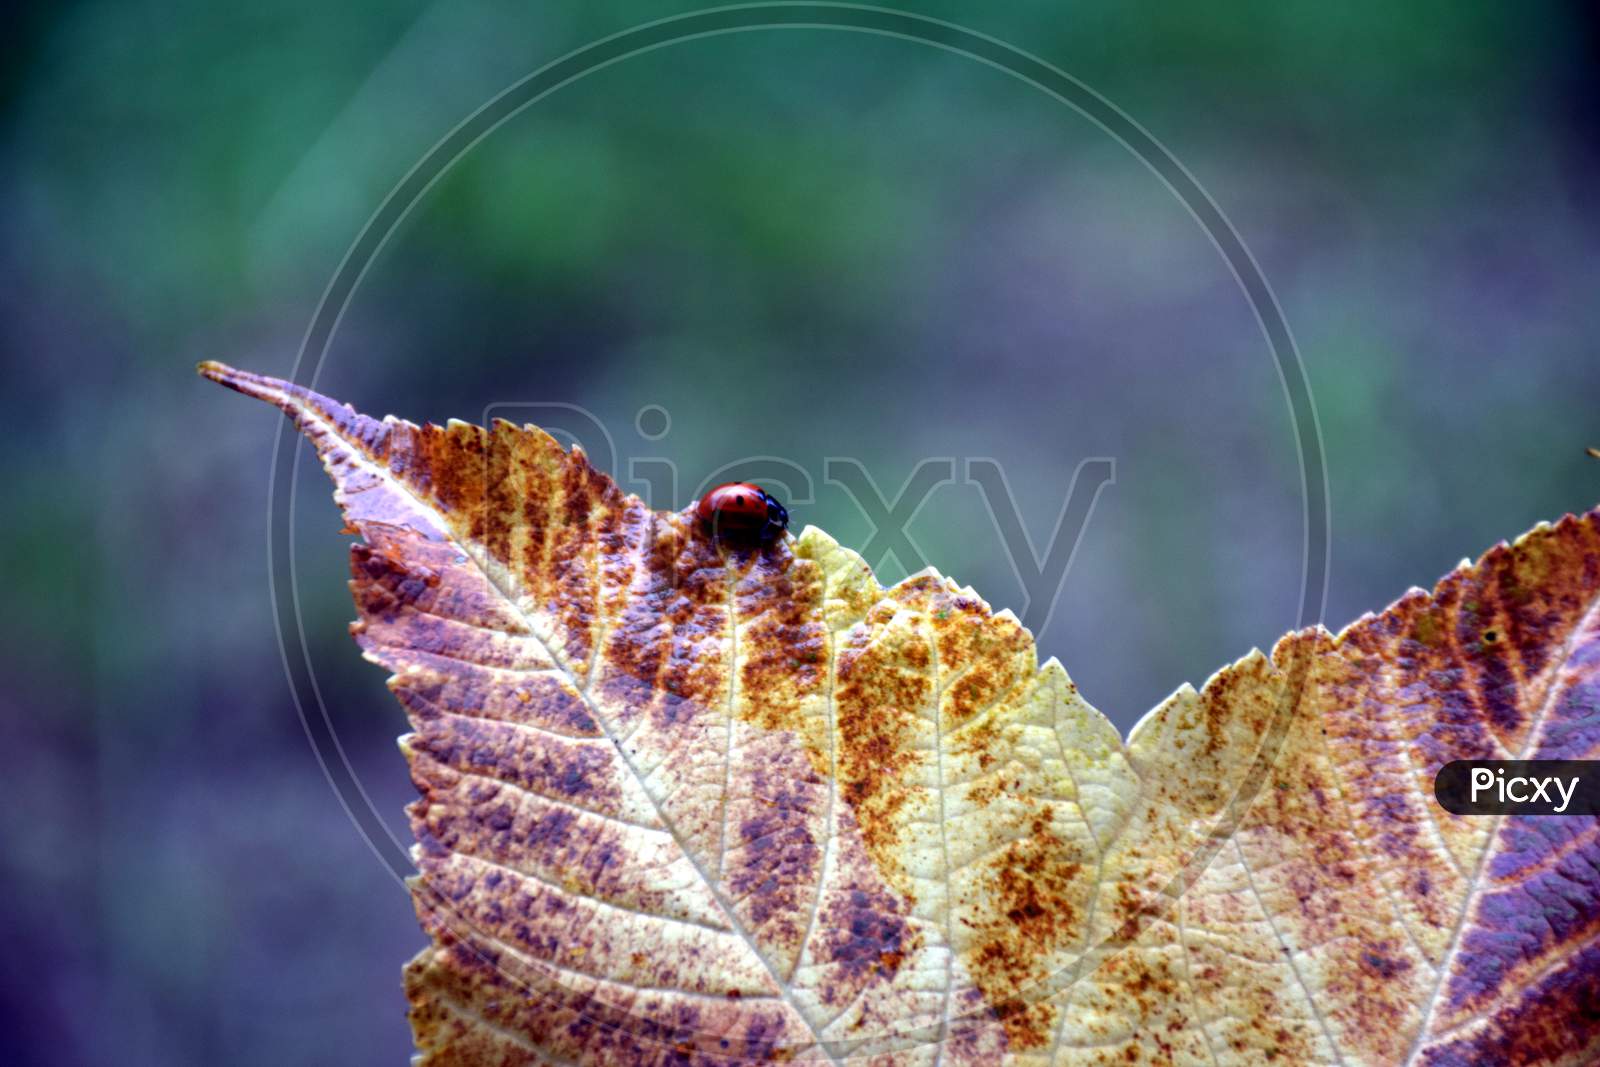 A Big Yellow Leaf In Jungle And Lady Bug On It